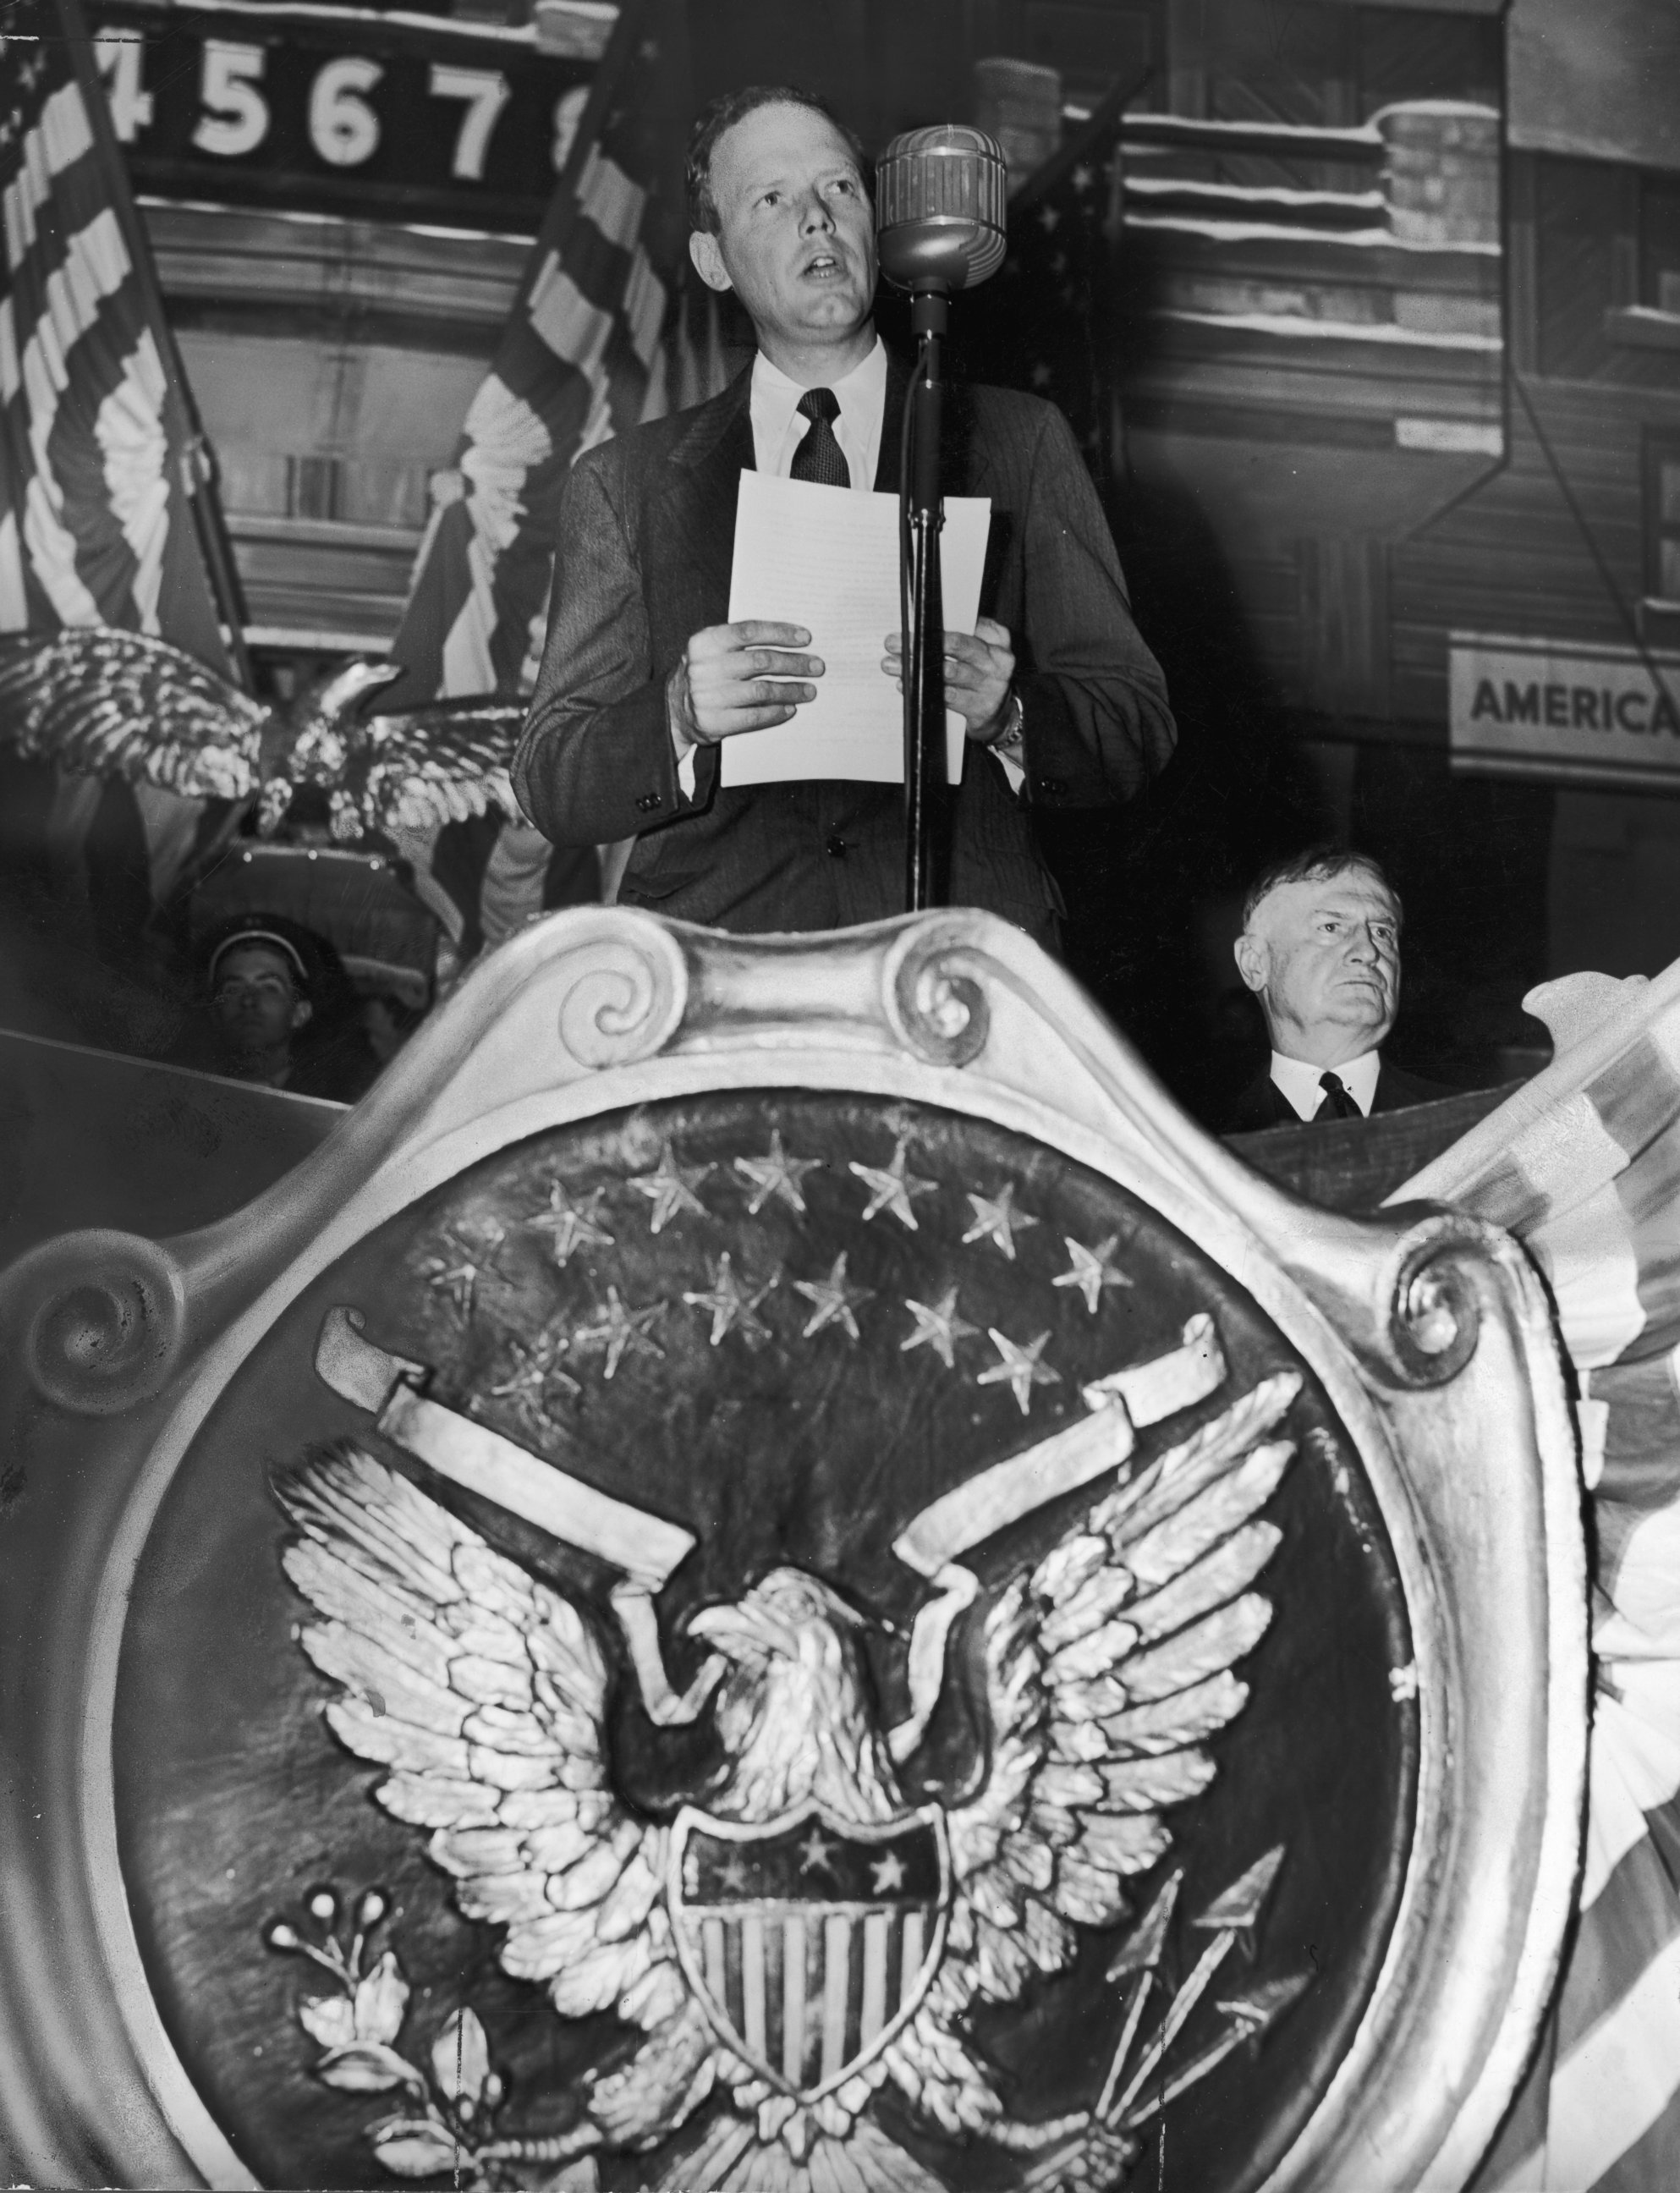 PHOTO: Charles Lindbergh speaks to a large crowd of America First Committee supporters in 1941.